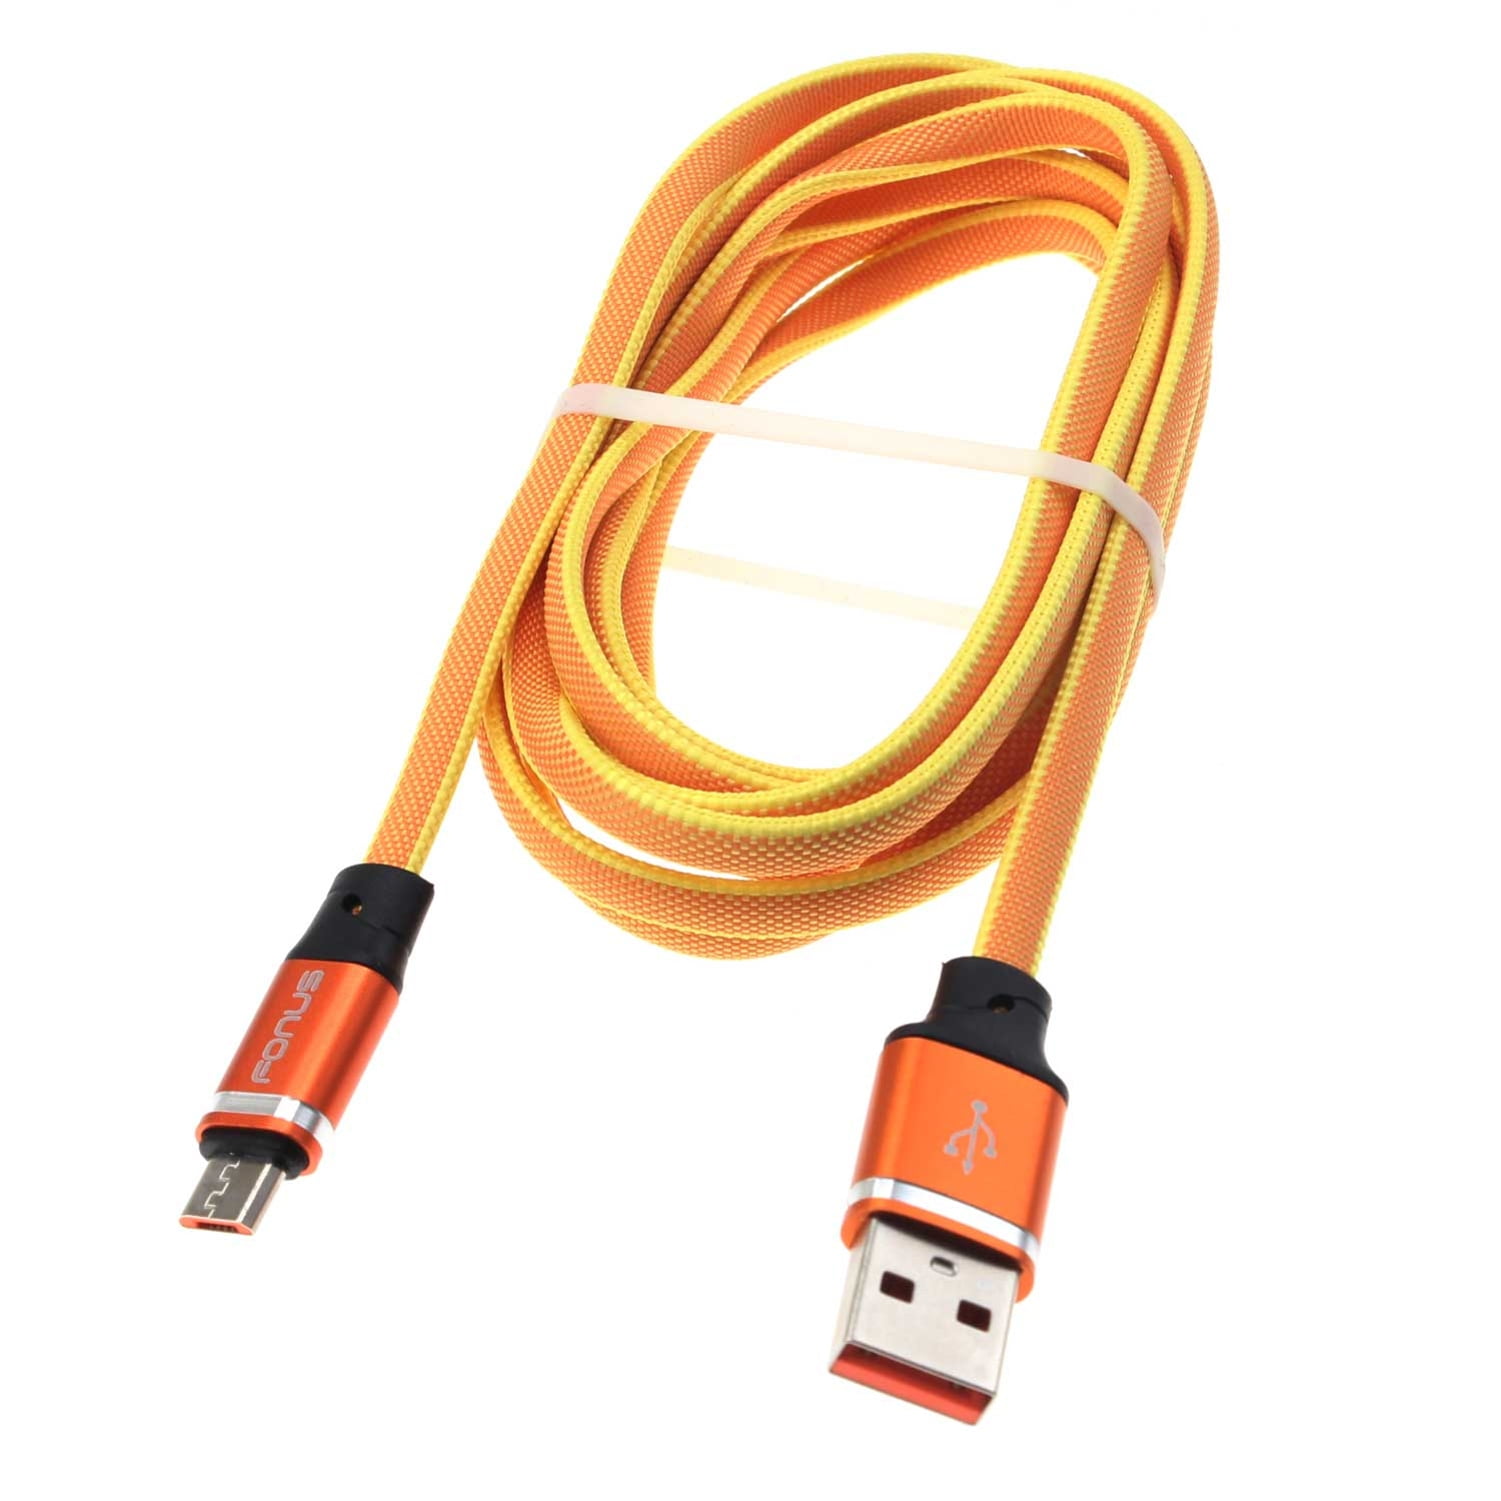 Micro USB 6FT Braided Cable Cord for Samsung Galaxy Tab Note Pro 8.4 10.1 12.2 